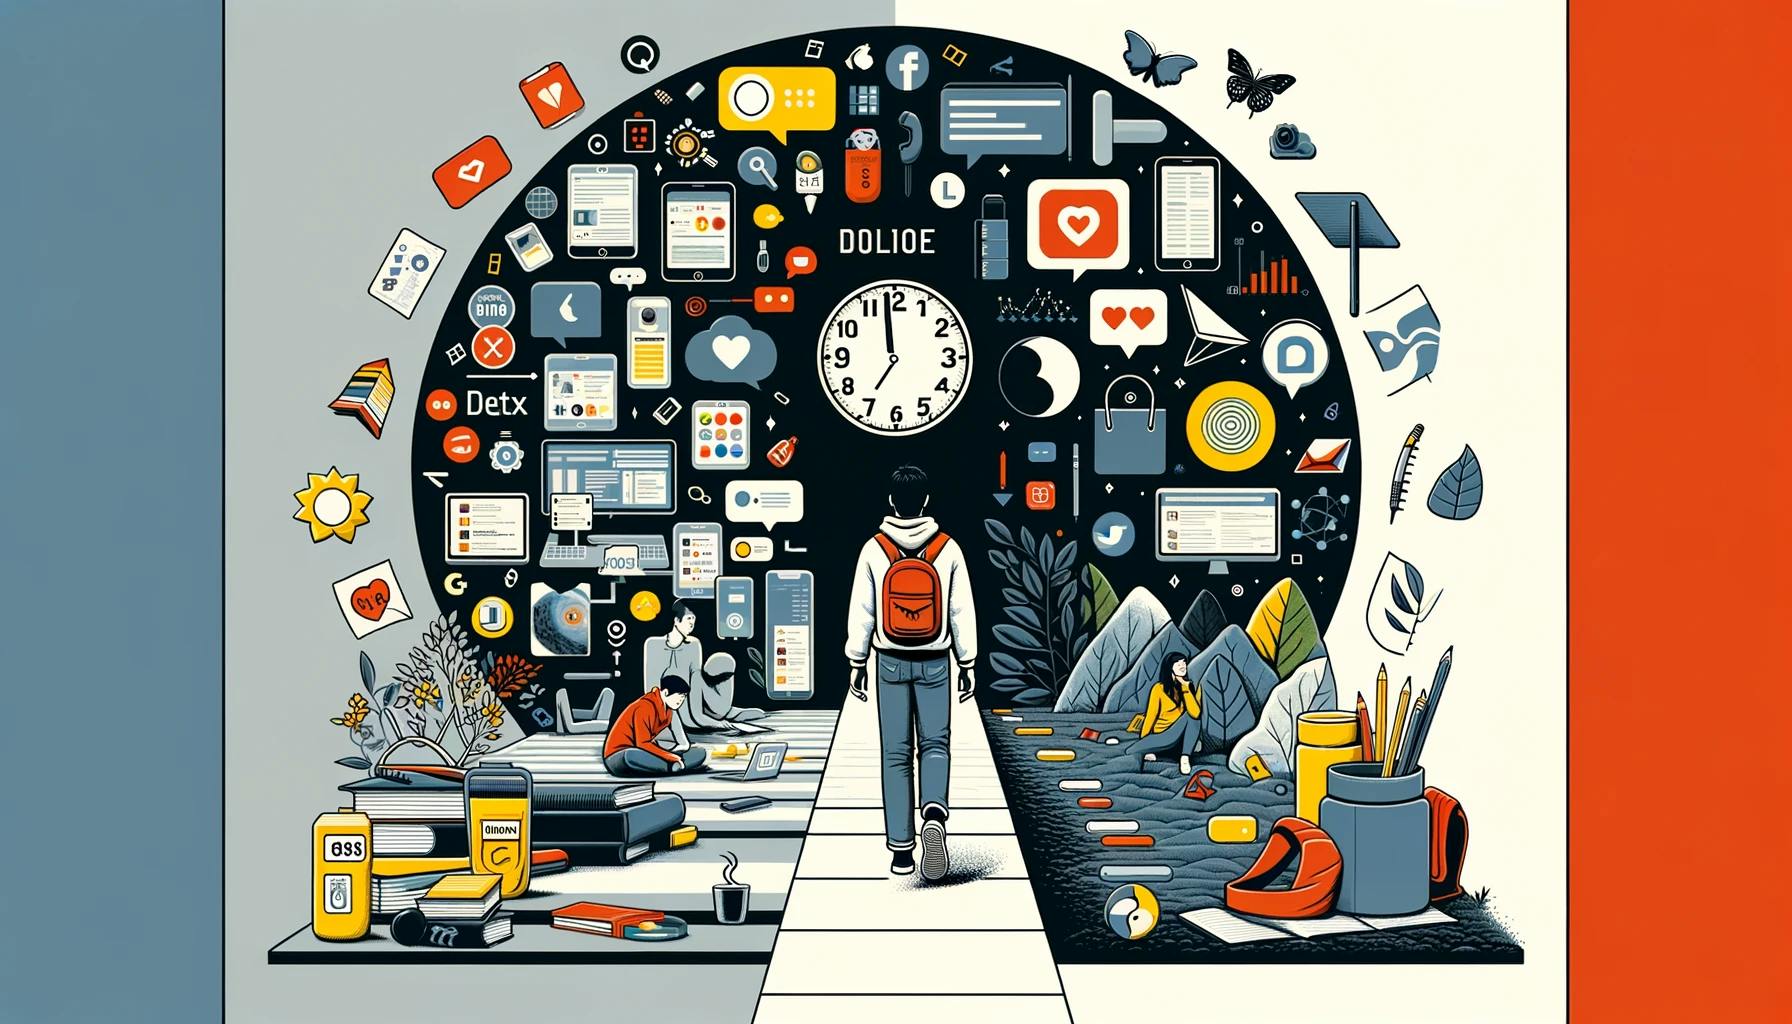 The Ultimate Digital Detox Plan for University Students: Reclaiming Focus in an Age of Distraction